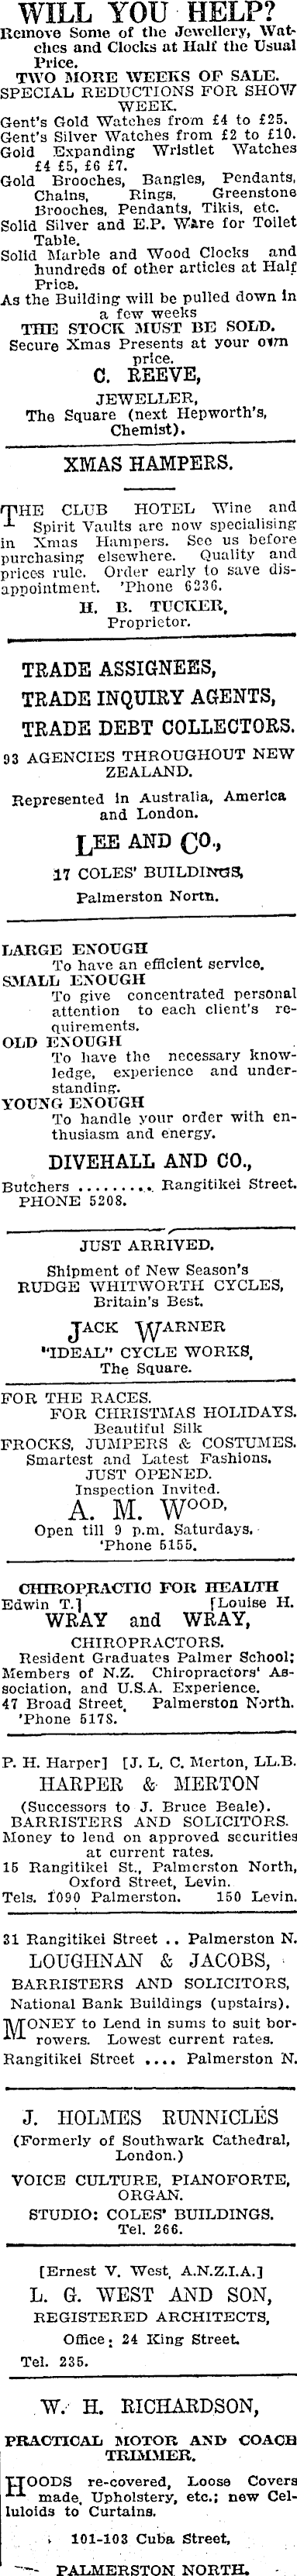 Papers Past Newspapers Manawatu Times 19 December 1922 Page 6 Advertisements Column 2